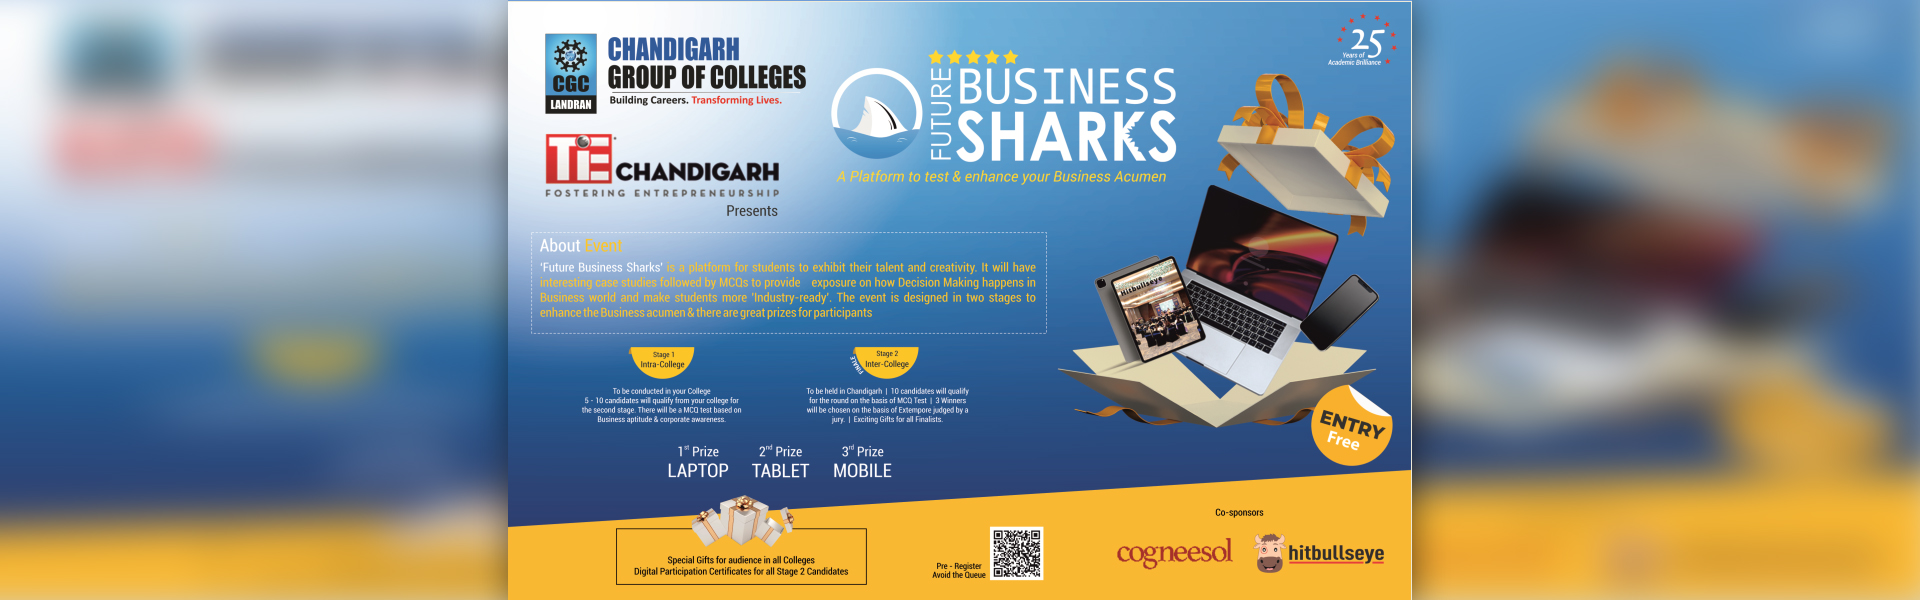 Future Business Sharks” on 15th November, 2022 